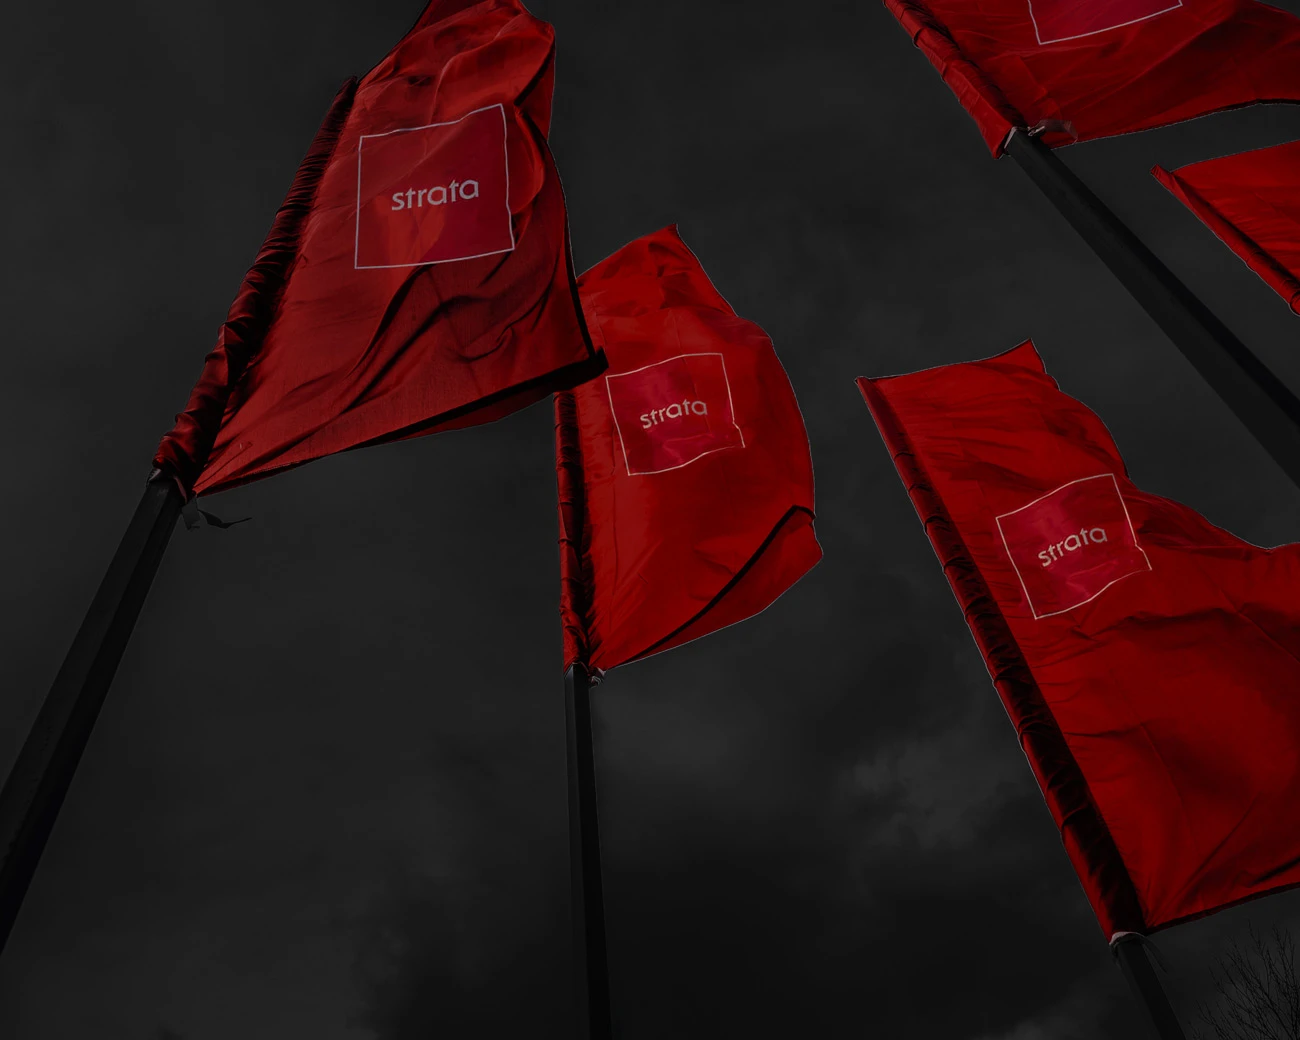 Branded Strata Flags in the Wind